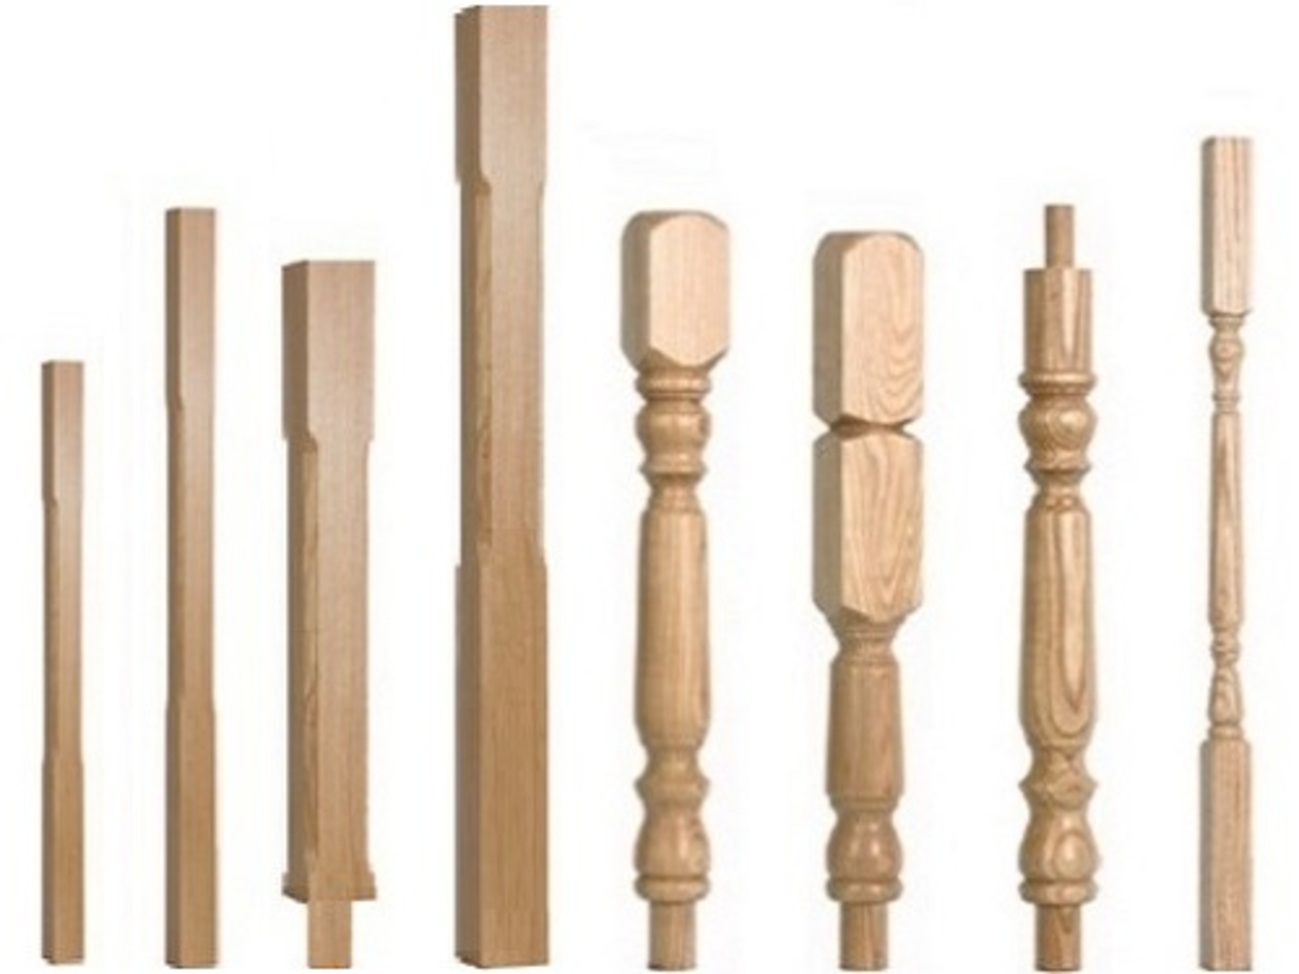 Spindle & Newel Post Styles